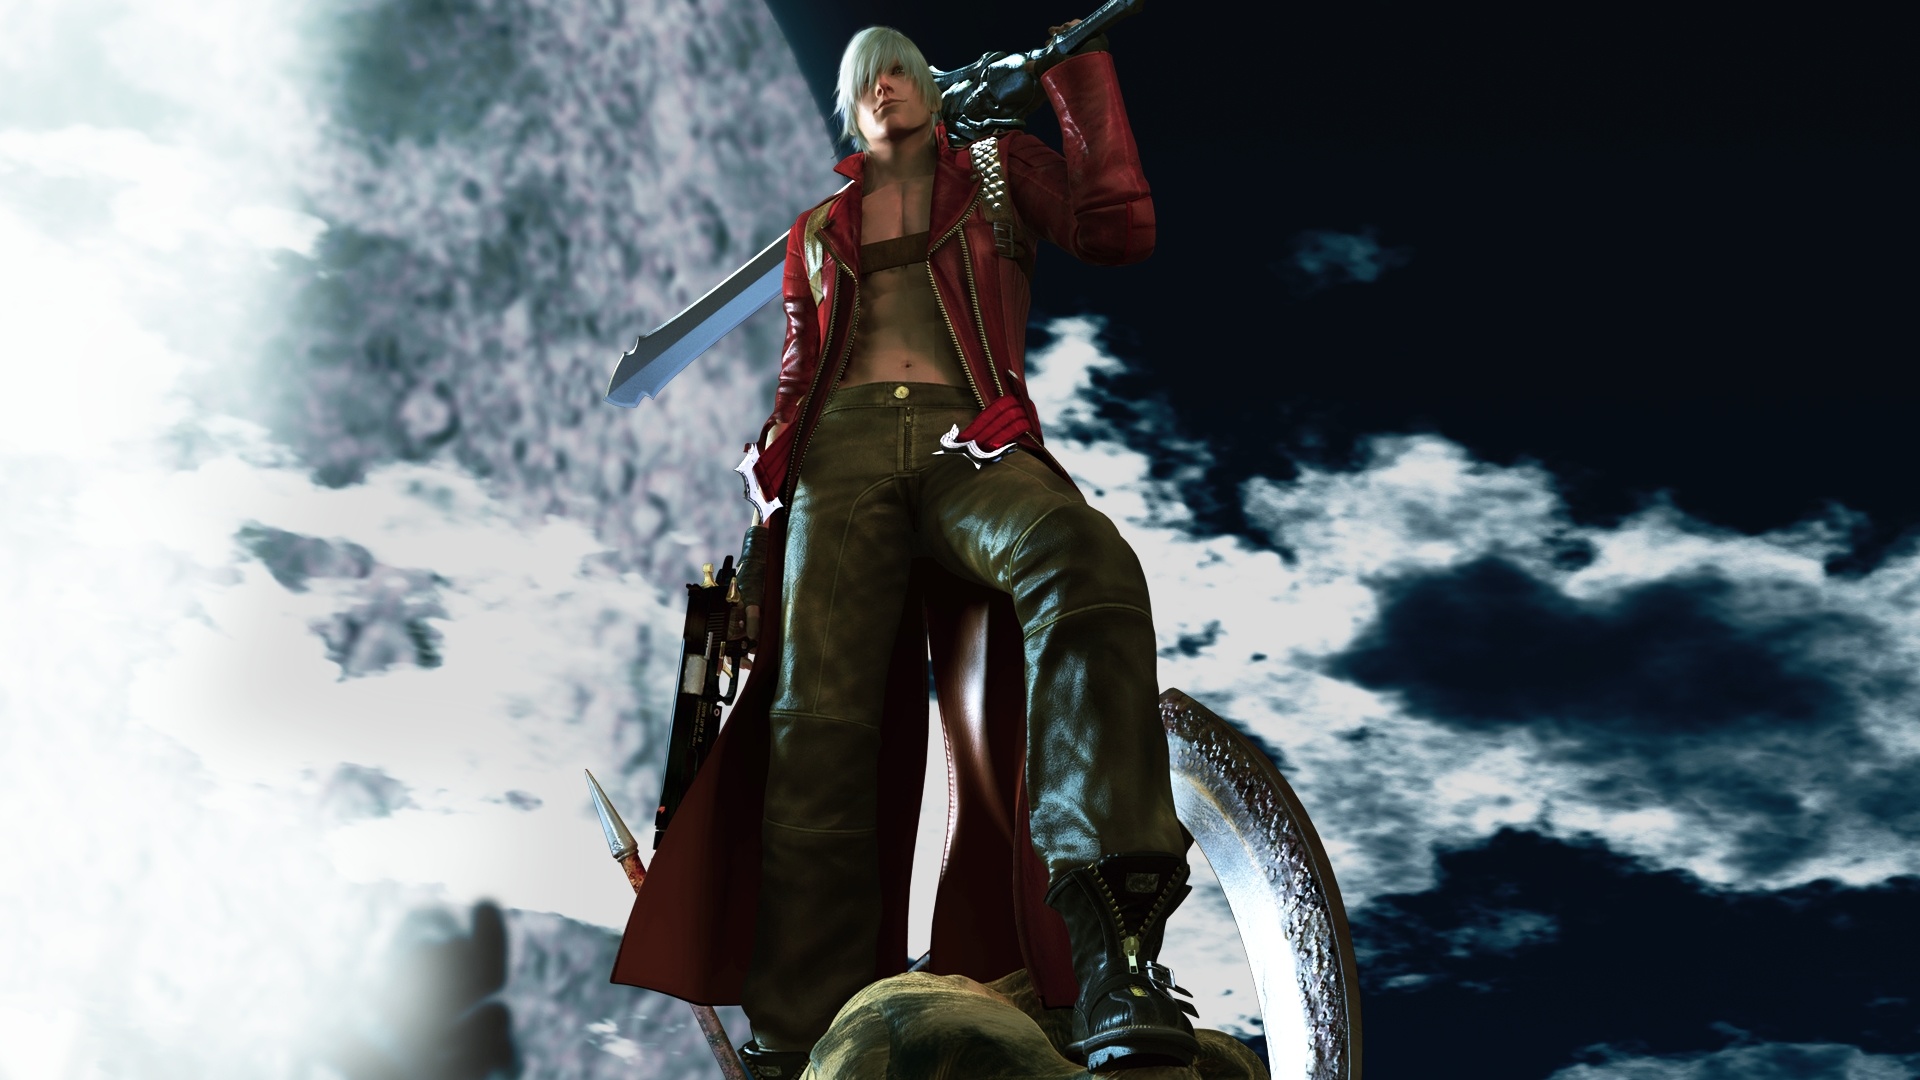 dante devil may cry download free